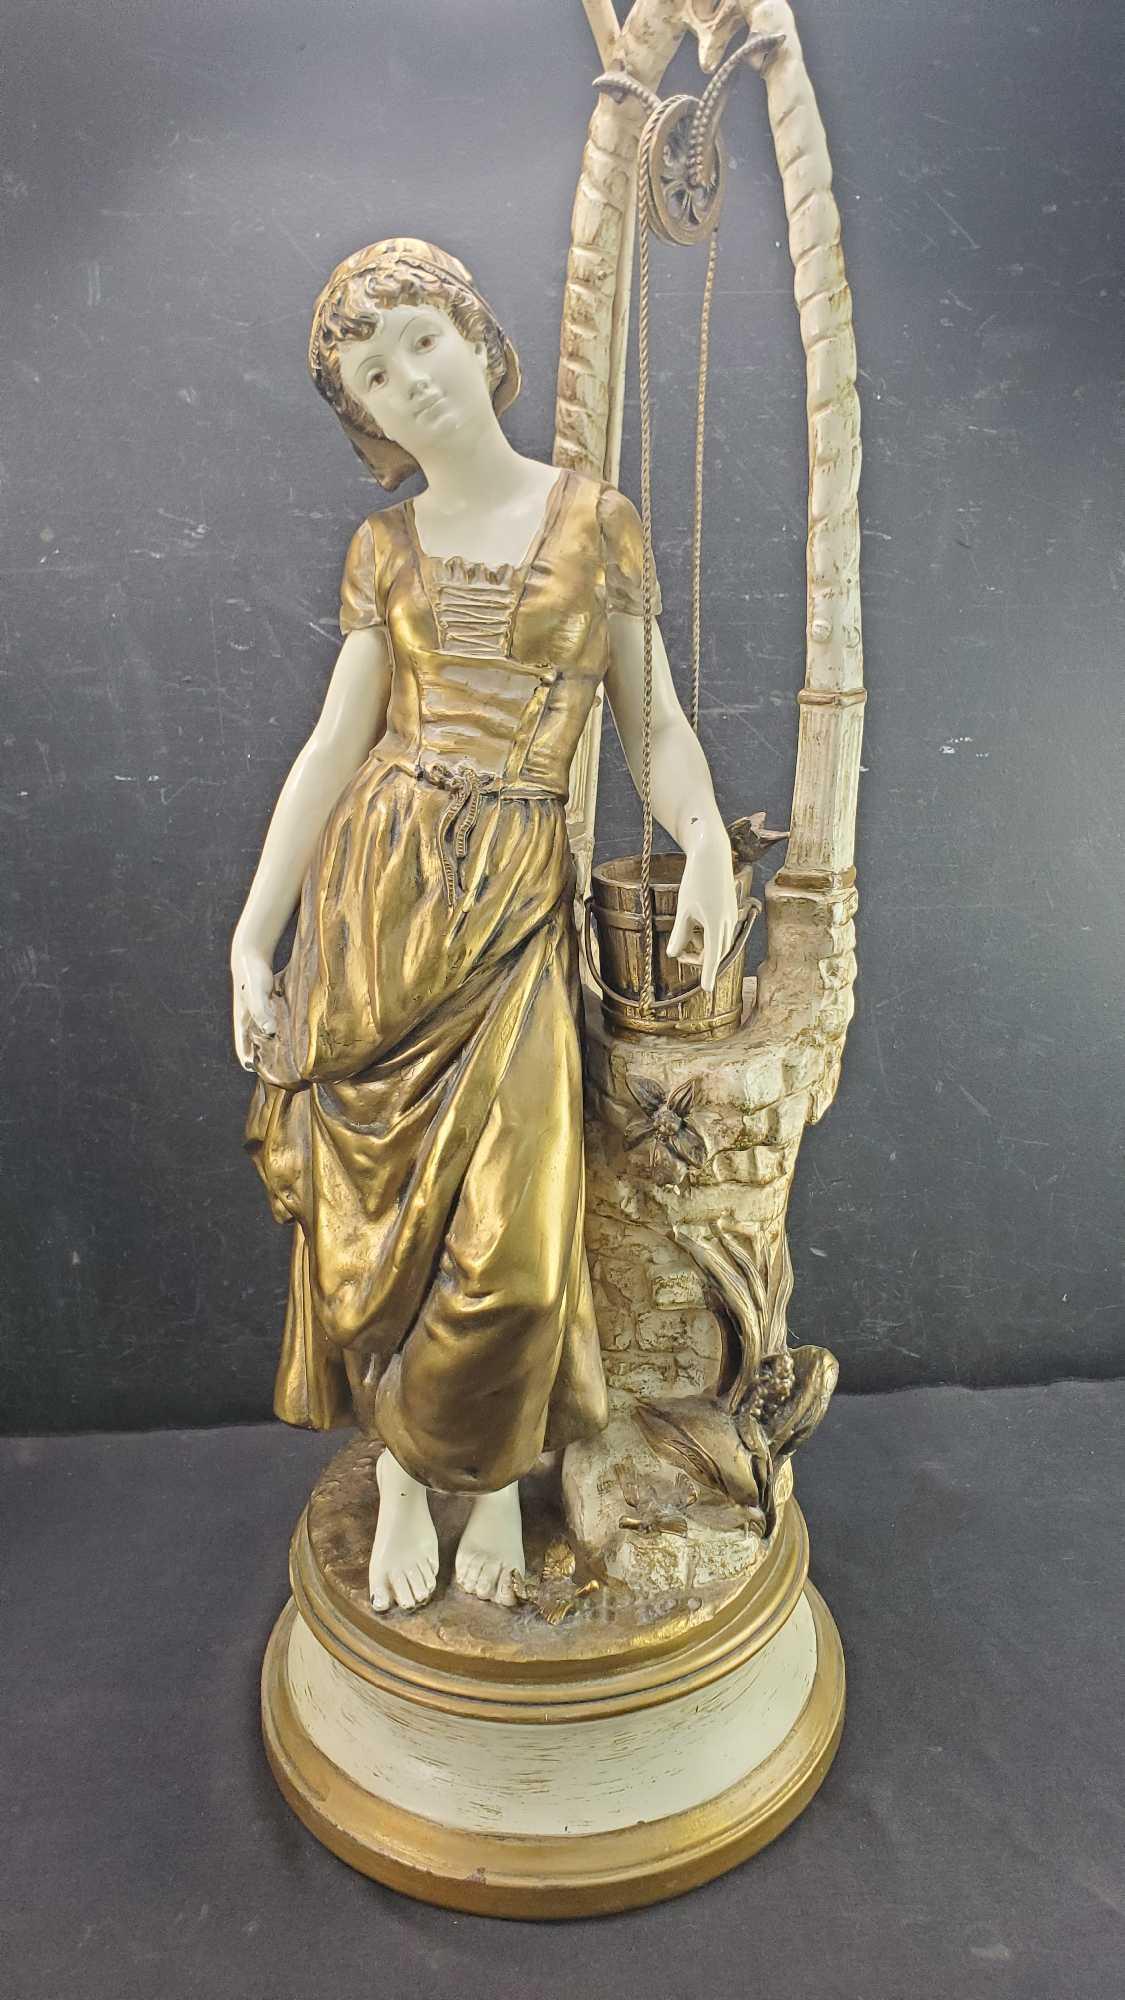 PAIR OF VINTAGE FRENCH STYLE JB HIRSCH FIGURAL CAST METAL MAIDEN TABLE LAMPS WITH LAMPSHADES